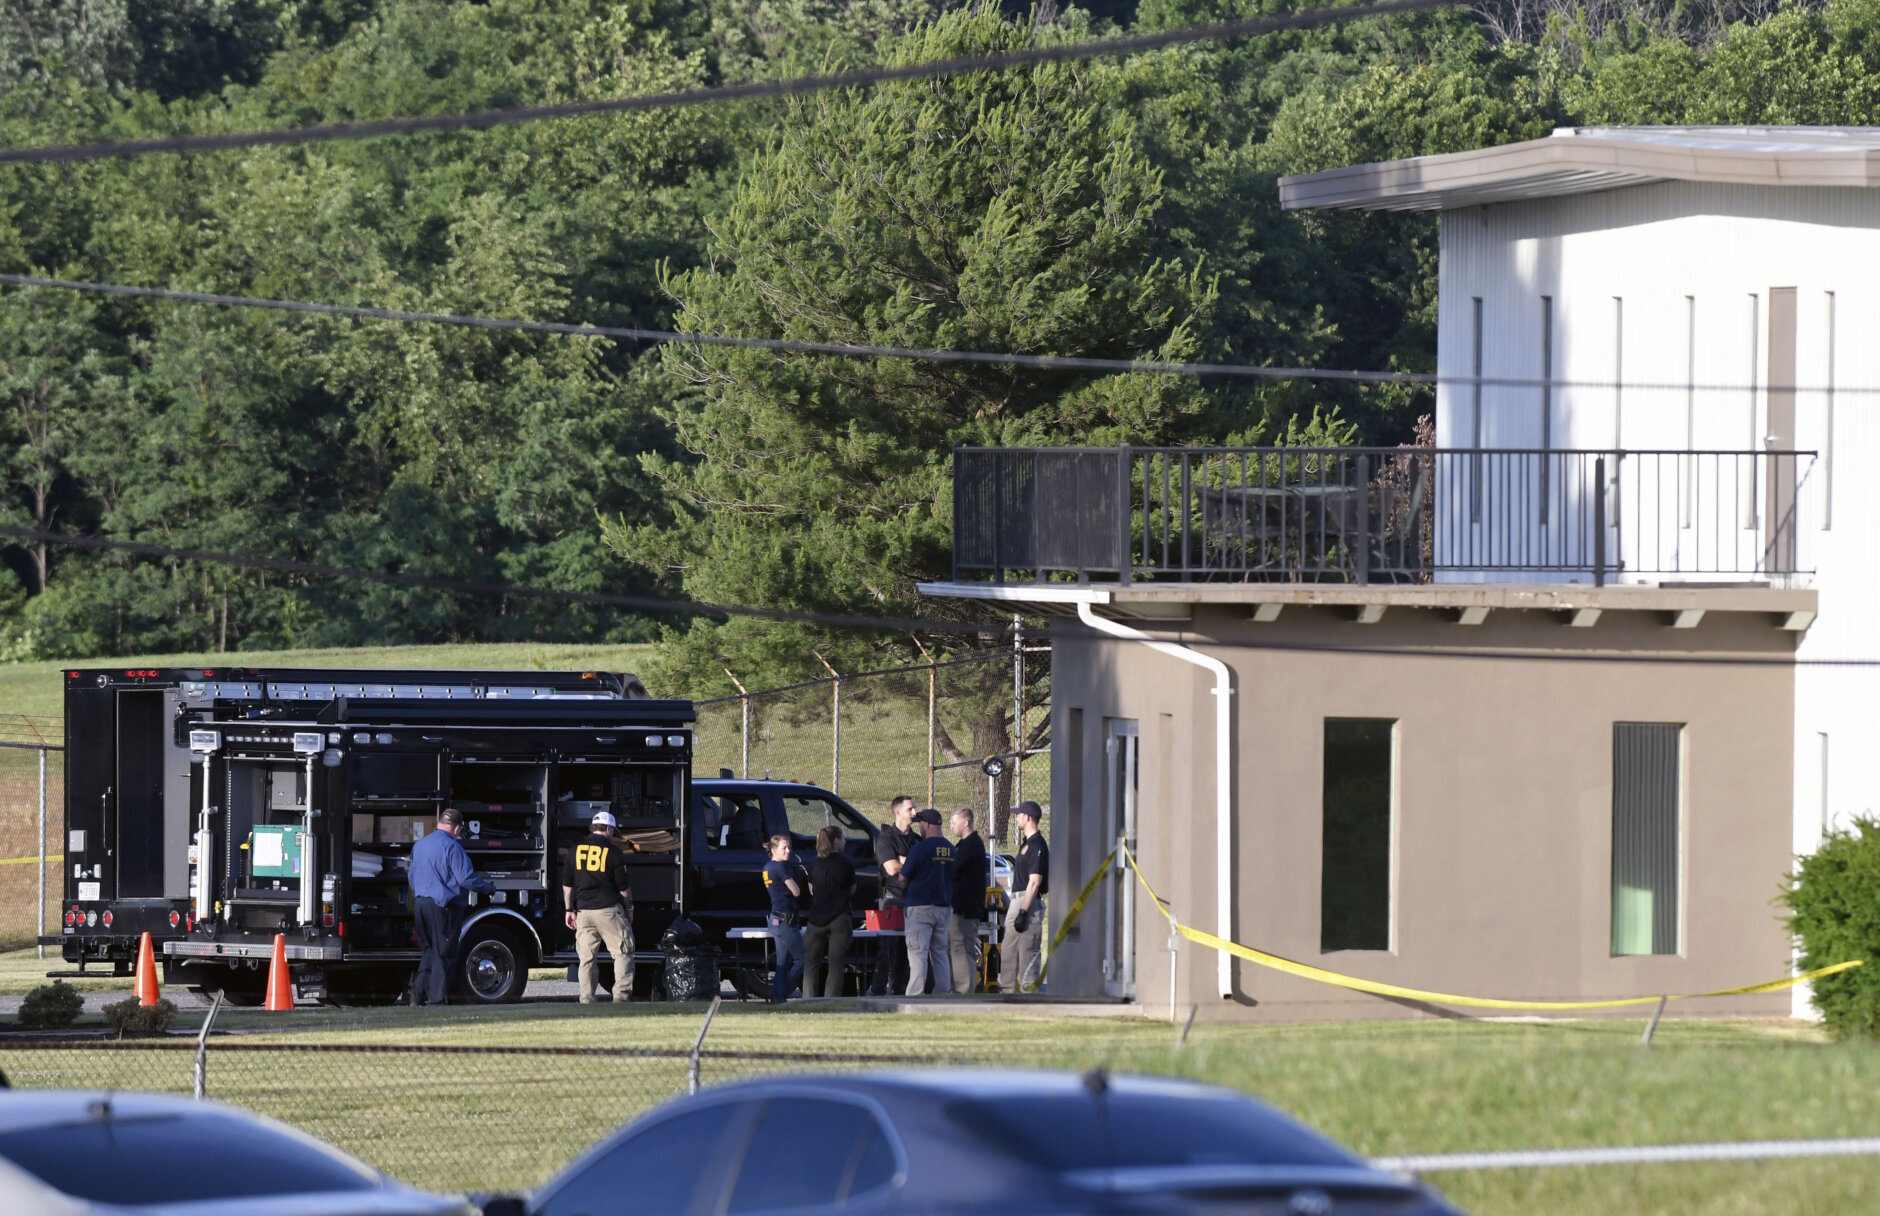 Law enforcement works near where a man opened fire at a business, killing three people before the suspect and a state trooper were wounded in a shootout, according to authorities, in Smithsburg, Md., Thursday, June 9, 2022. The Washington County ( Md.) Sheriff's Office said in a news release that three victims were found dead at Columbia Machine Inc. and a fourth victim was critically injured.  (AP Photo/Steve Ruark)